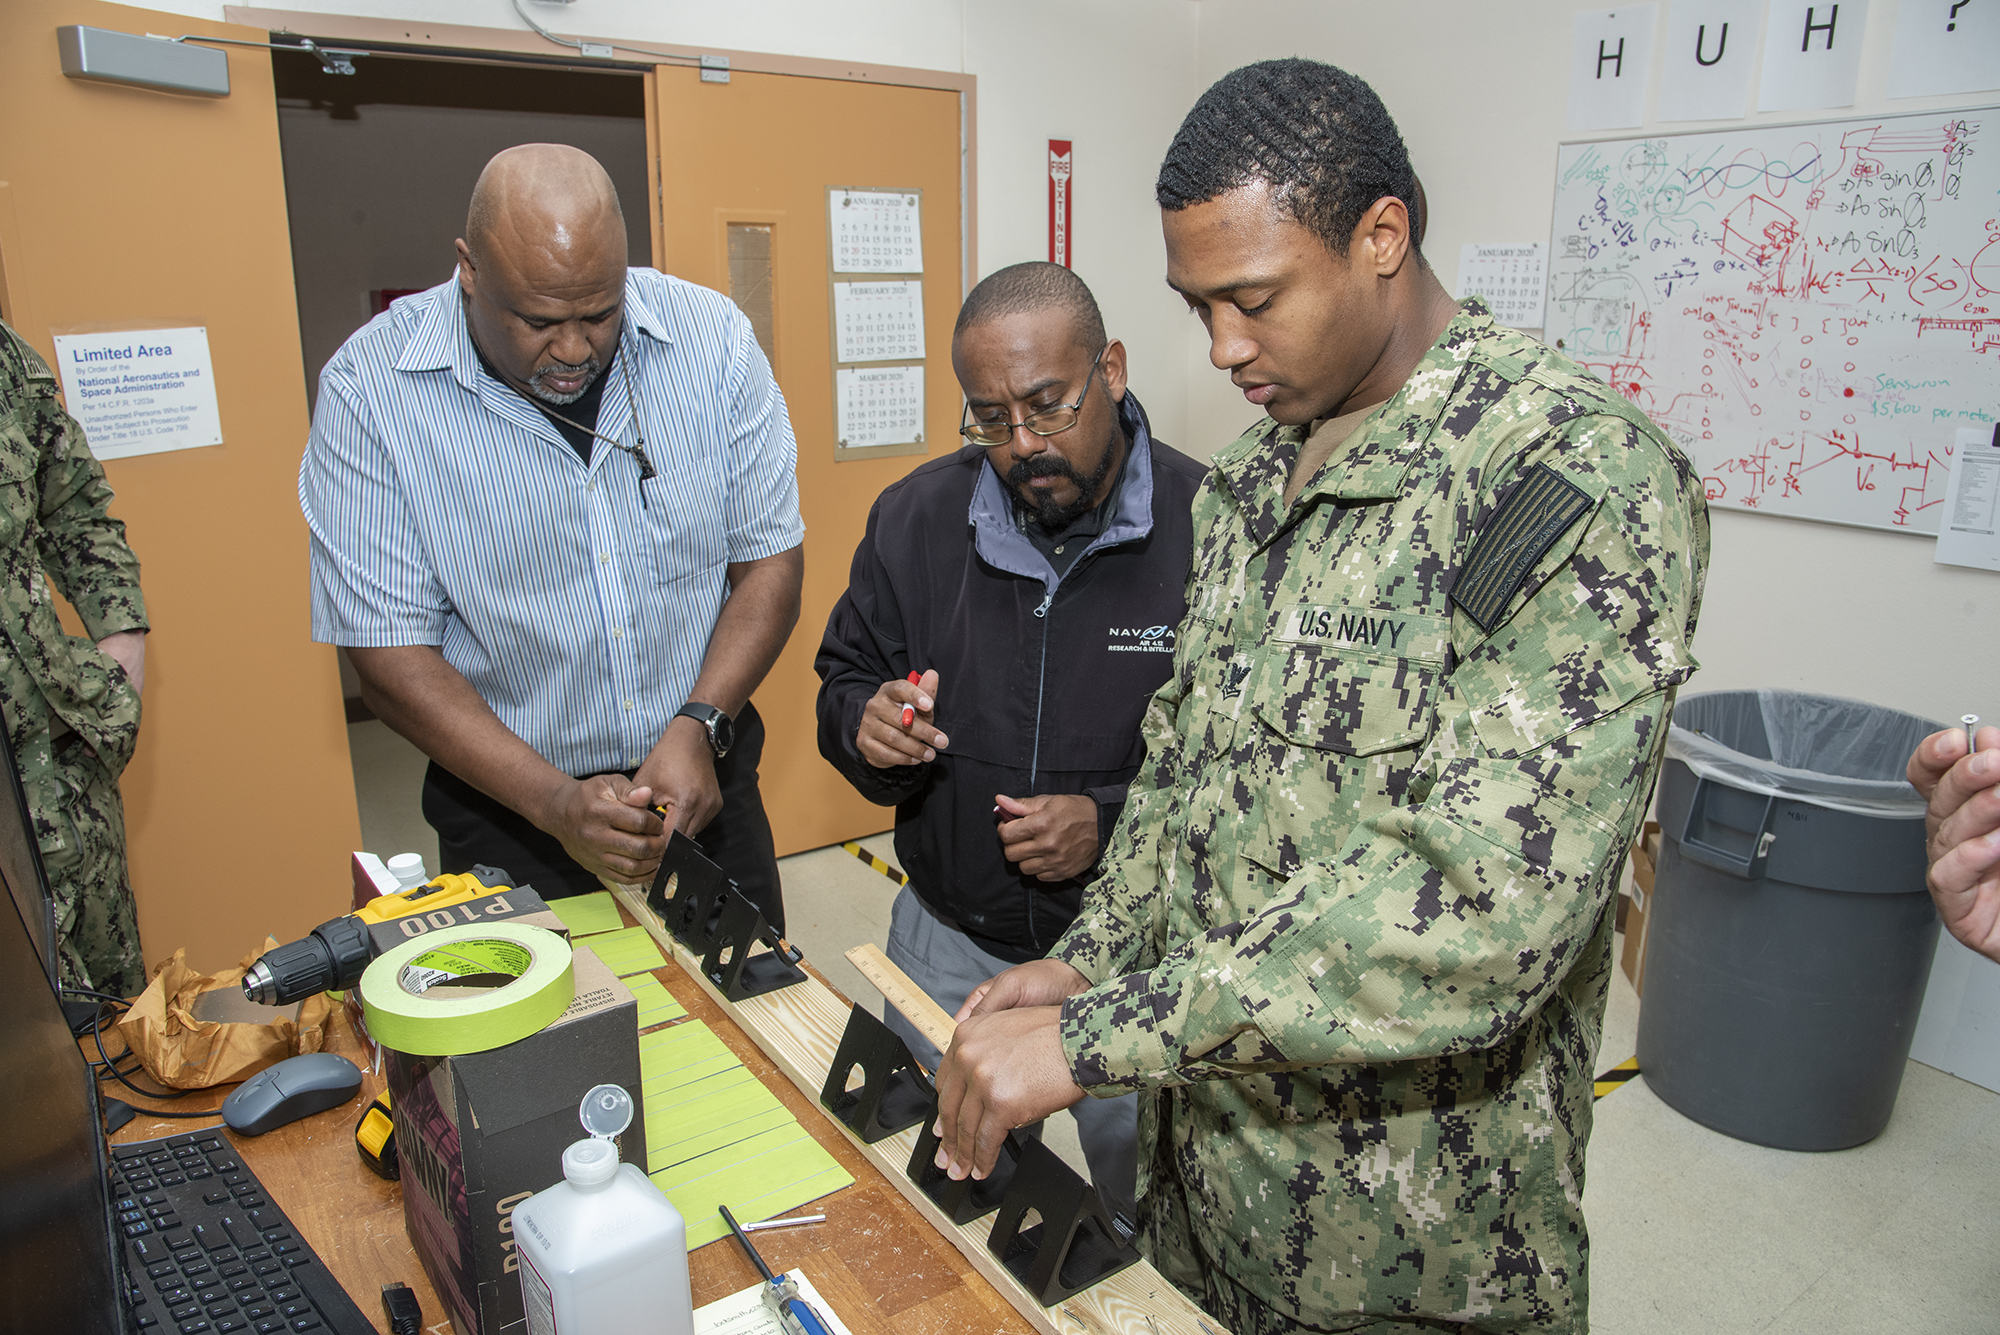 Alan Parker works with U. S. Navy staff on microFOSS project.